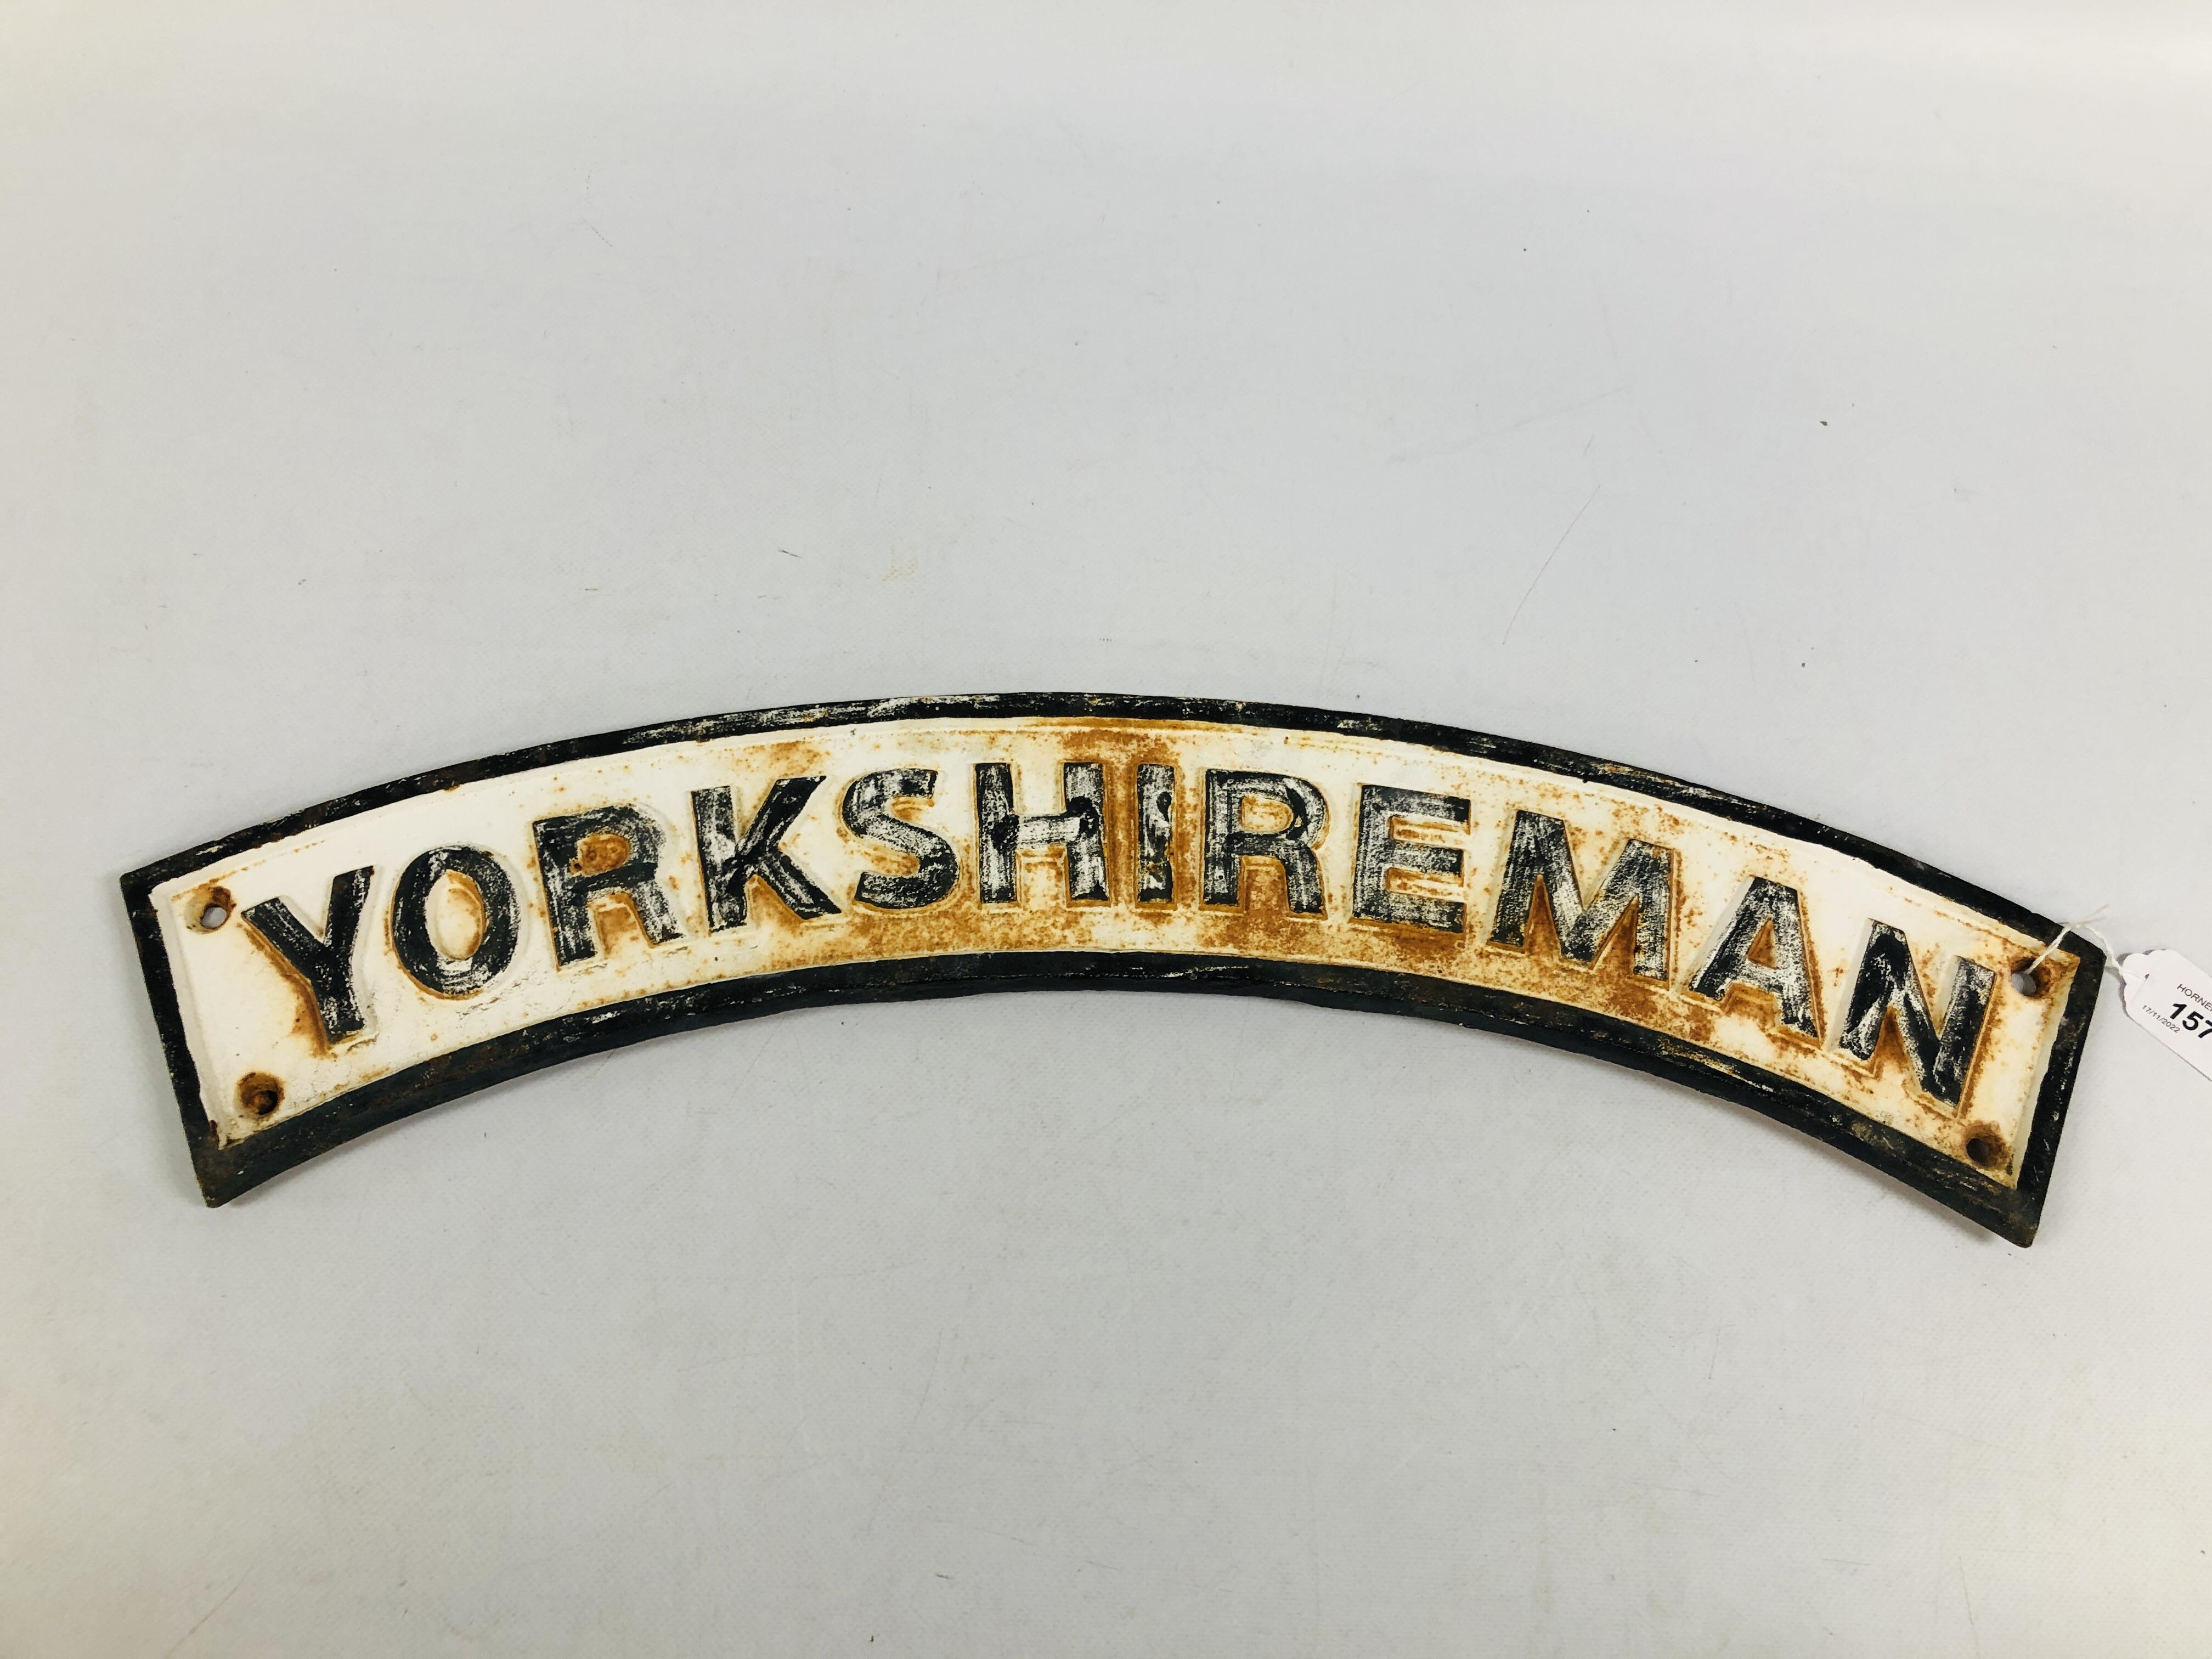 A REPRODUCTION CAST IRON "YORKSHIRE MAN" CURVED PLAQUE WIDTH 65CM.